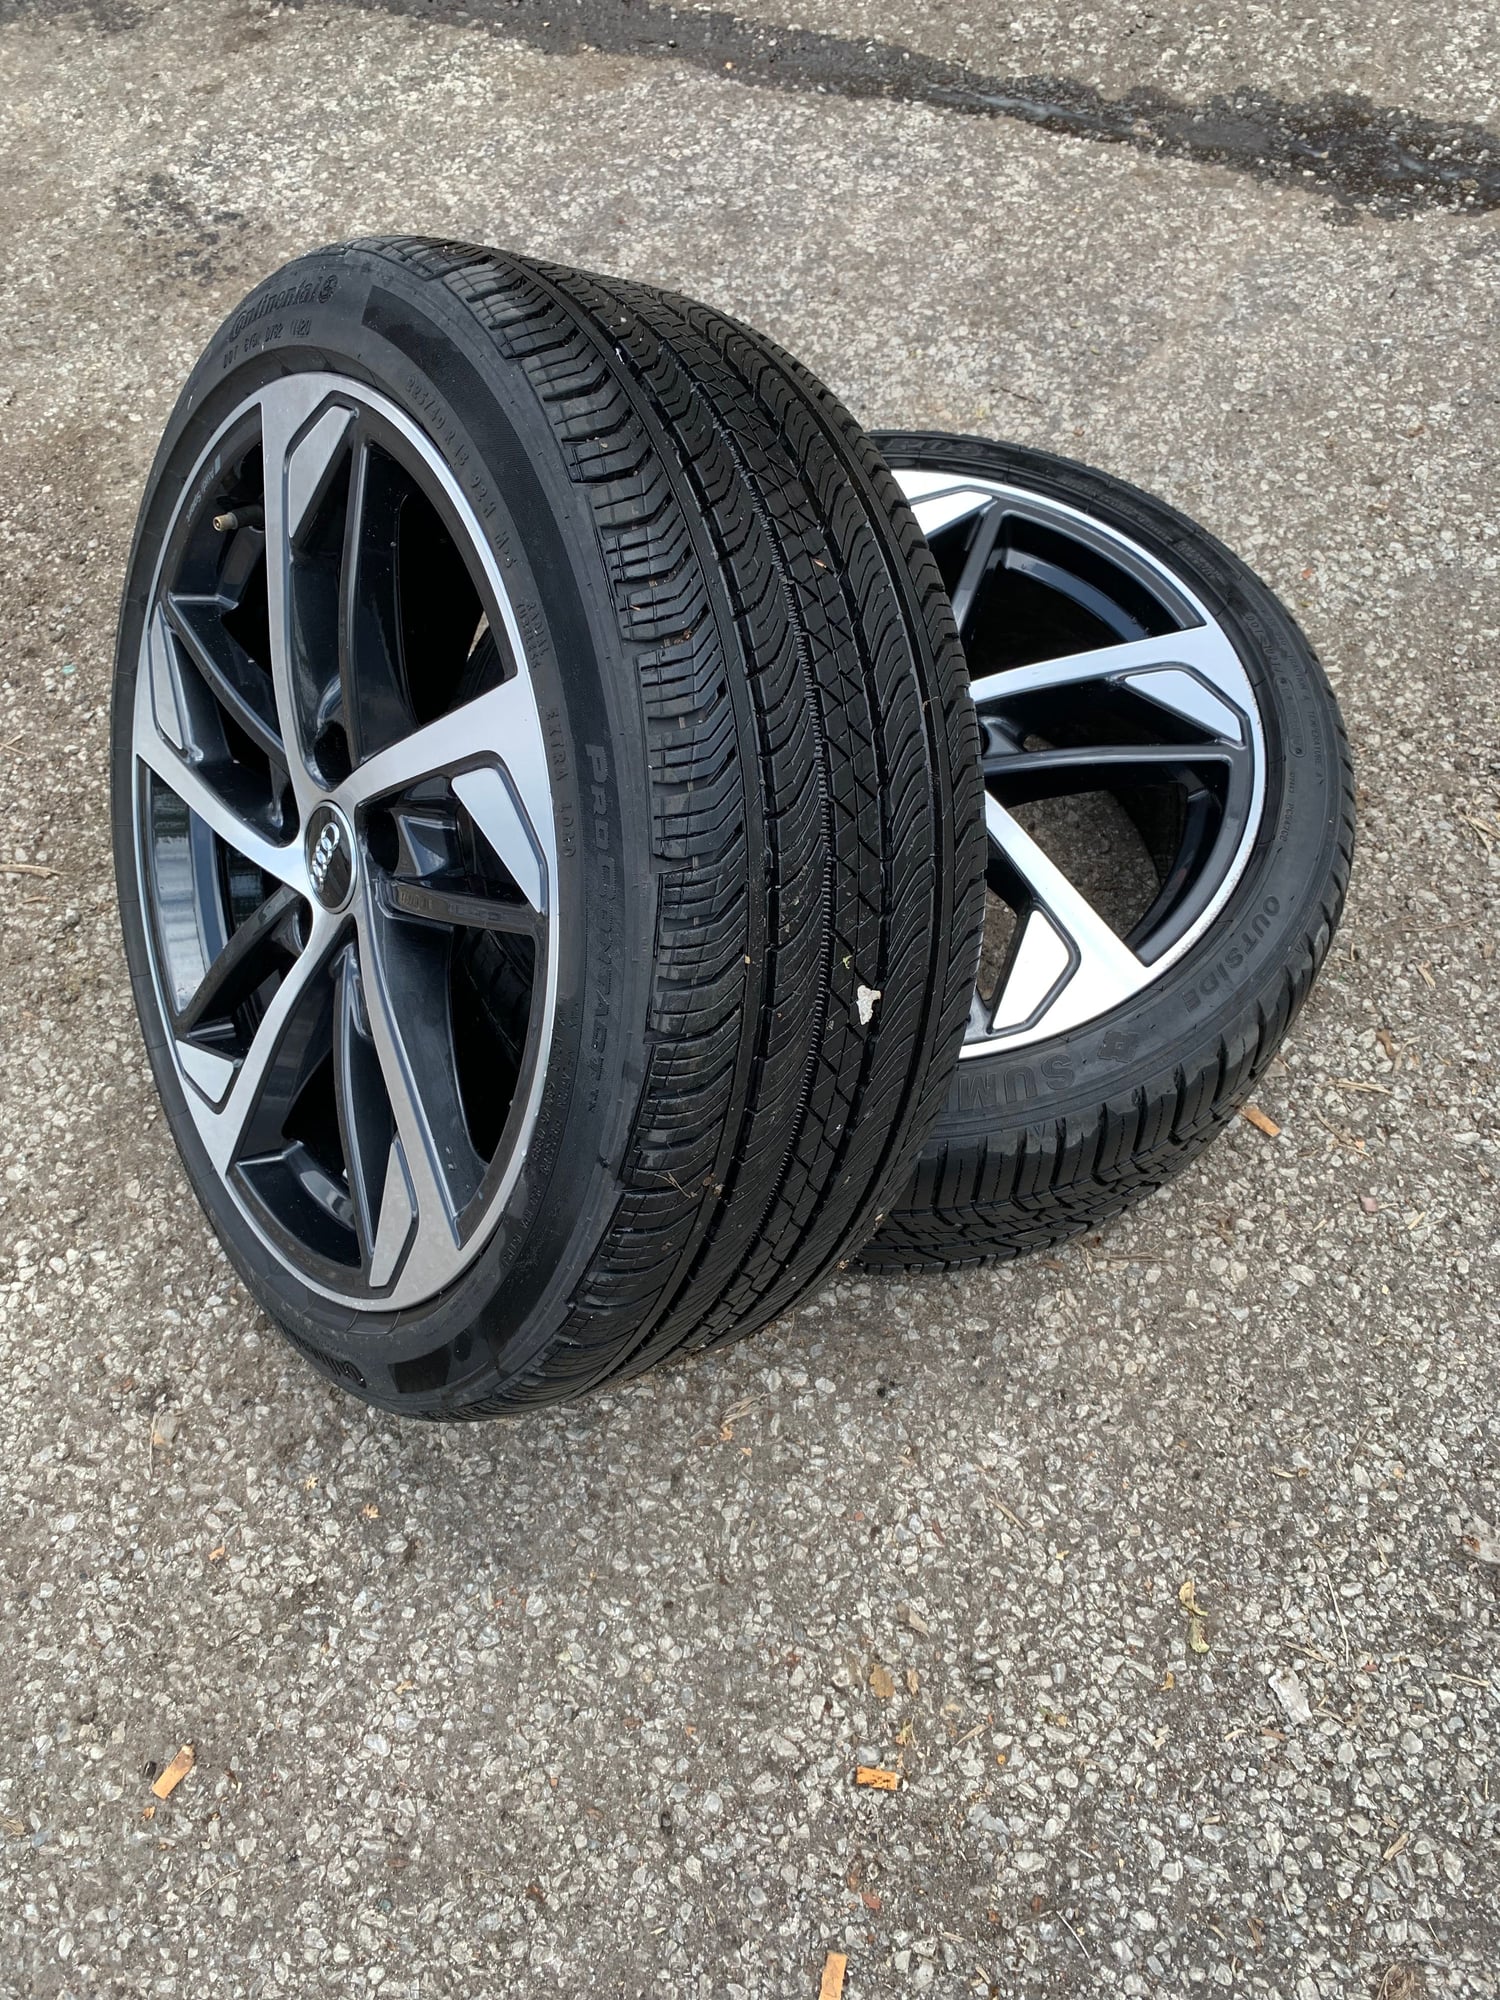 Wheels and Tires/Axles - 18x8 A3 wheels and tires - Used - 2020 to 2021 Audi A3 Quattro - Kansas City, MO 64106, United States